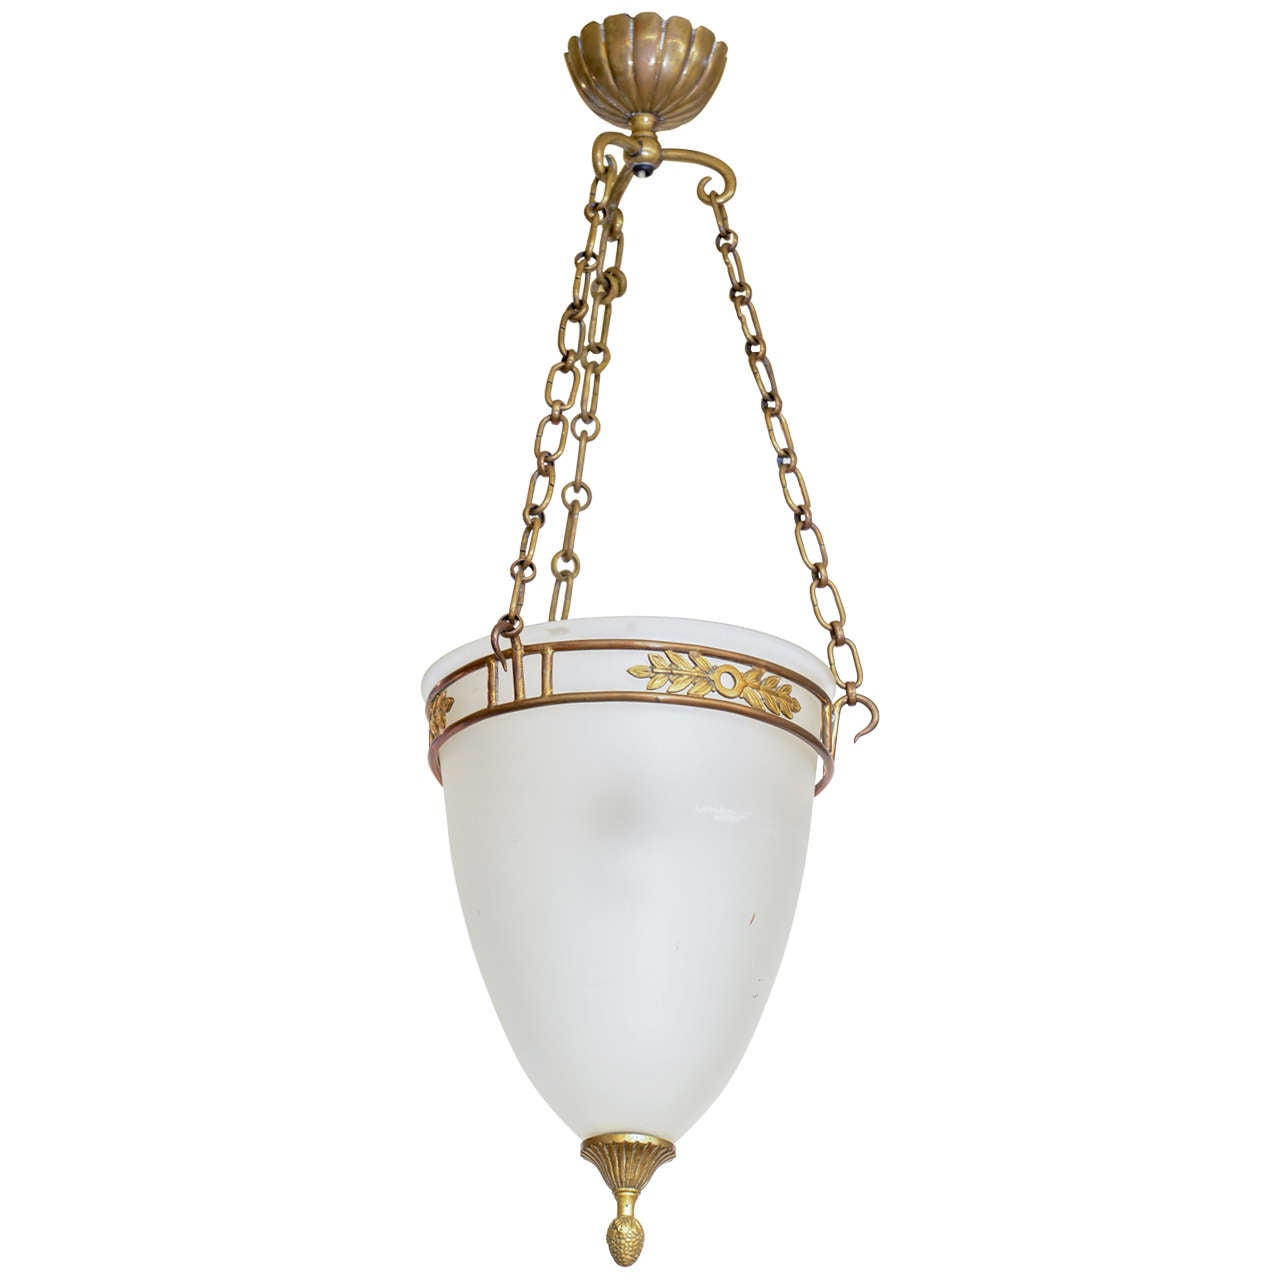  Antique French Ceiling Pendant Light 19th Century For Sale